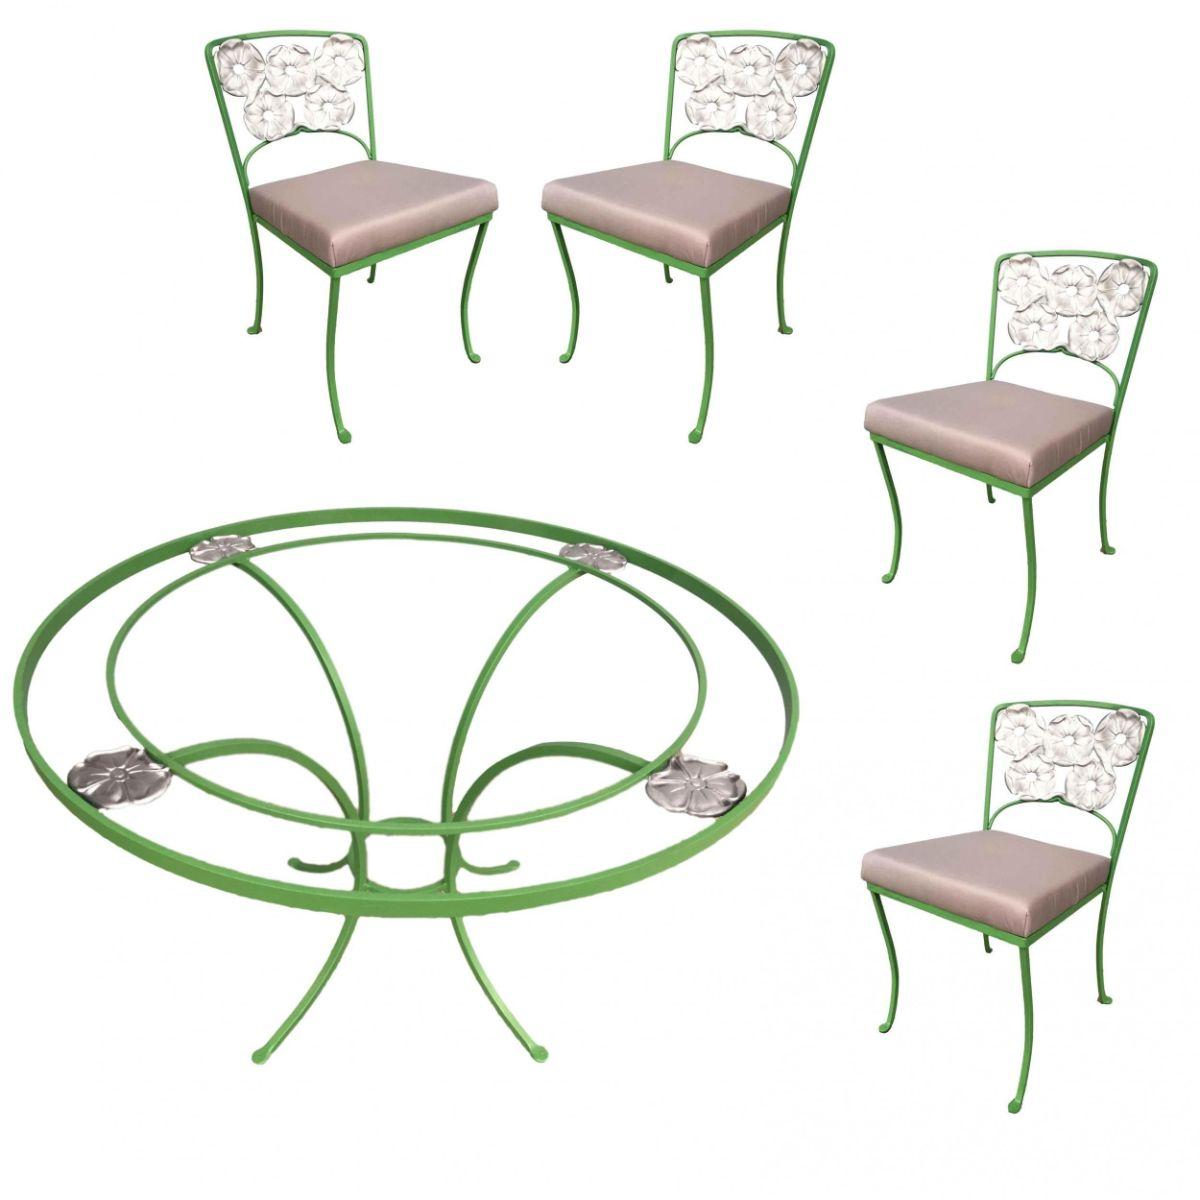 Woodard Aluminum Patio / Outdoor Floral Pattern Table and Chairs Picnic Set 5